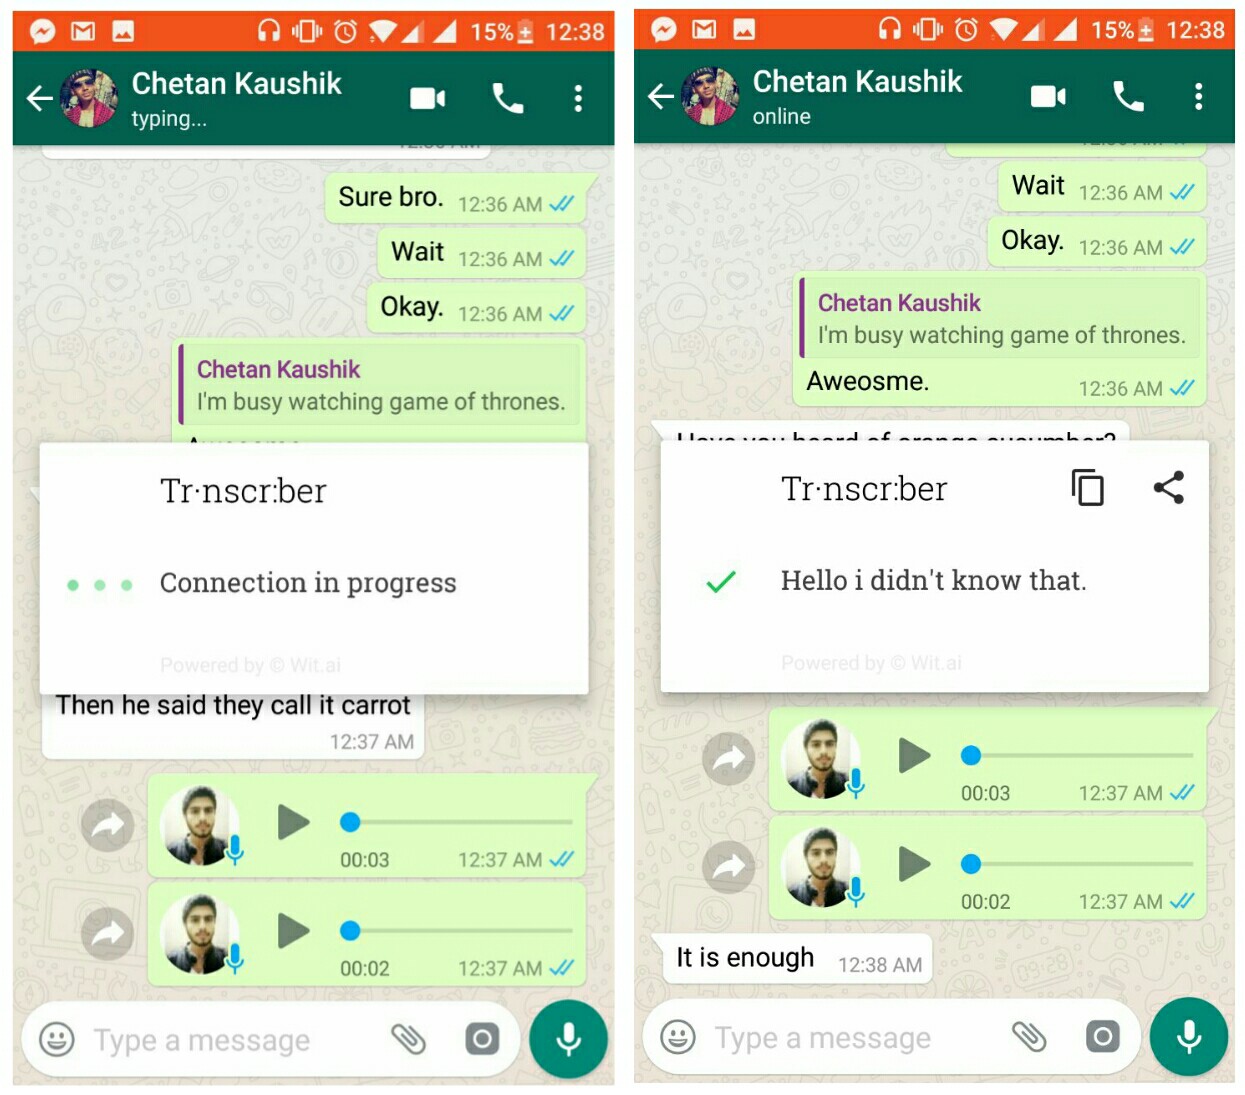 how to download whatsapp voice messages on pc